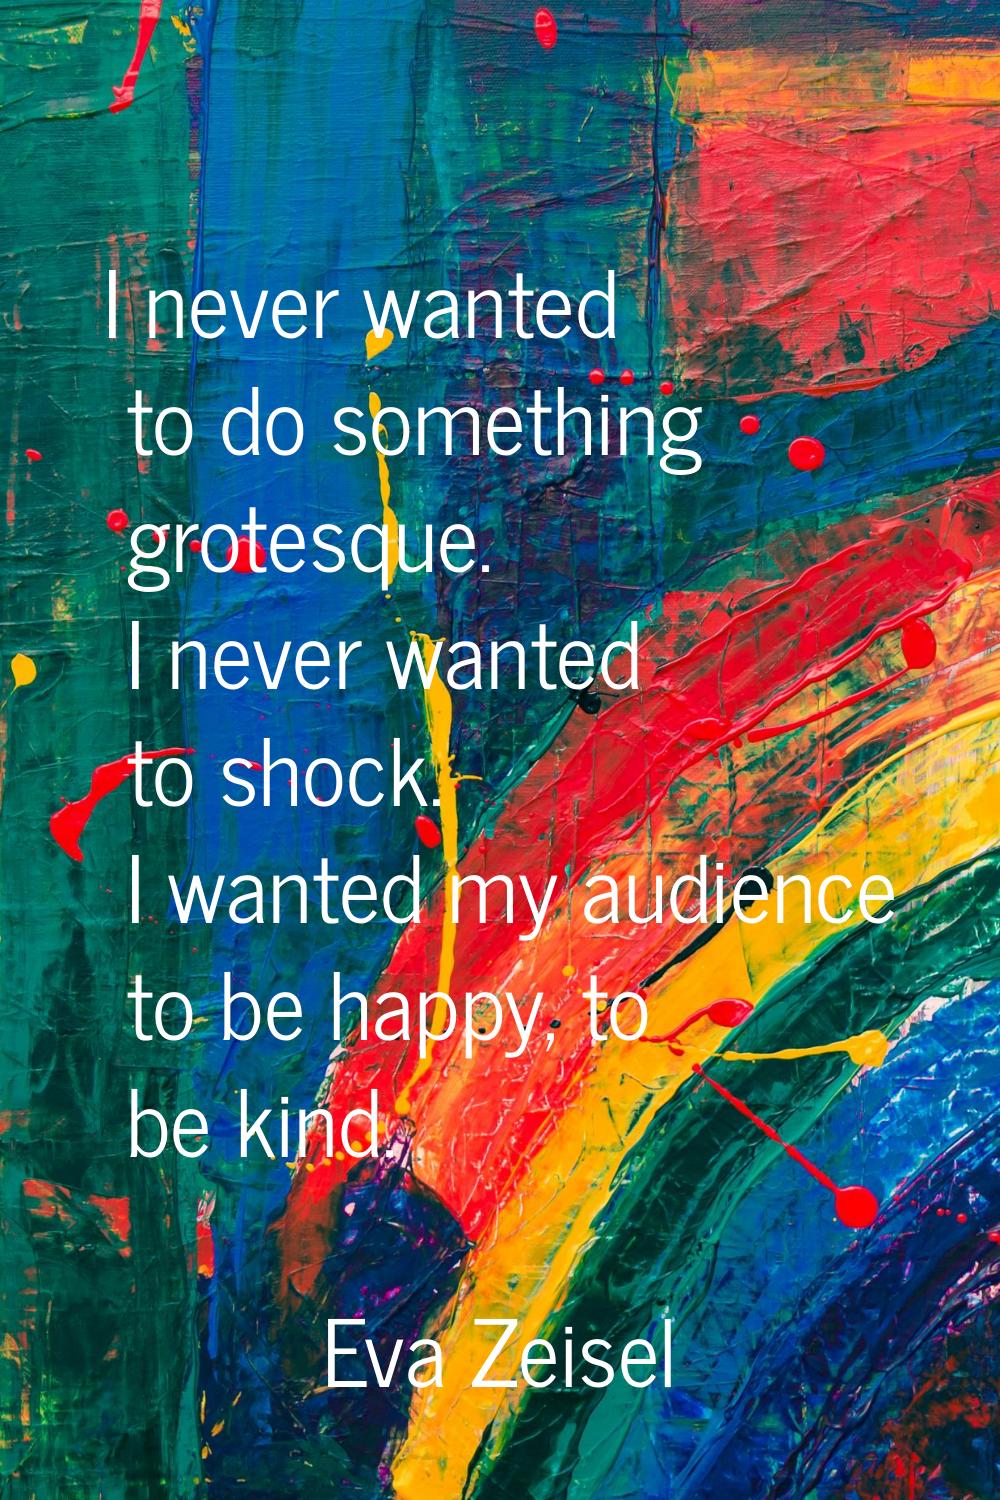 I never wanted to do something grotesque. I never wanted to shock. I wanted my audience to be happy